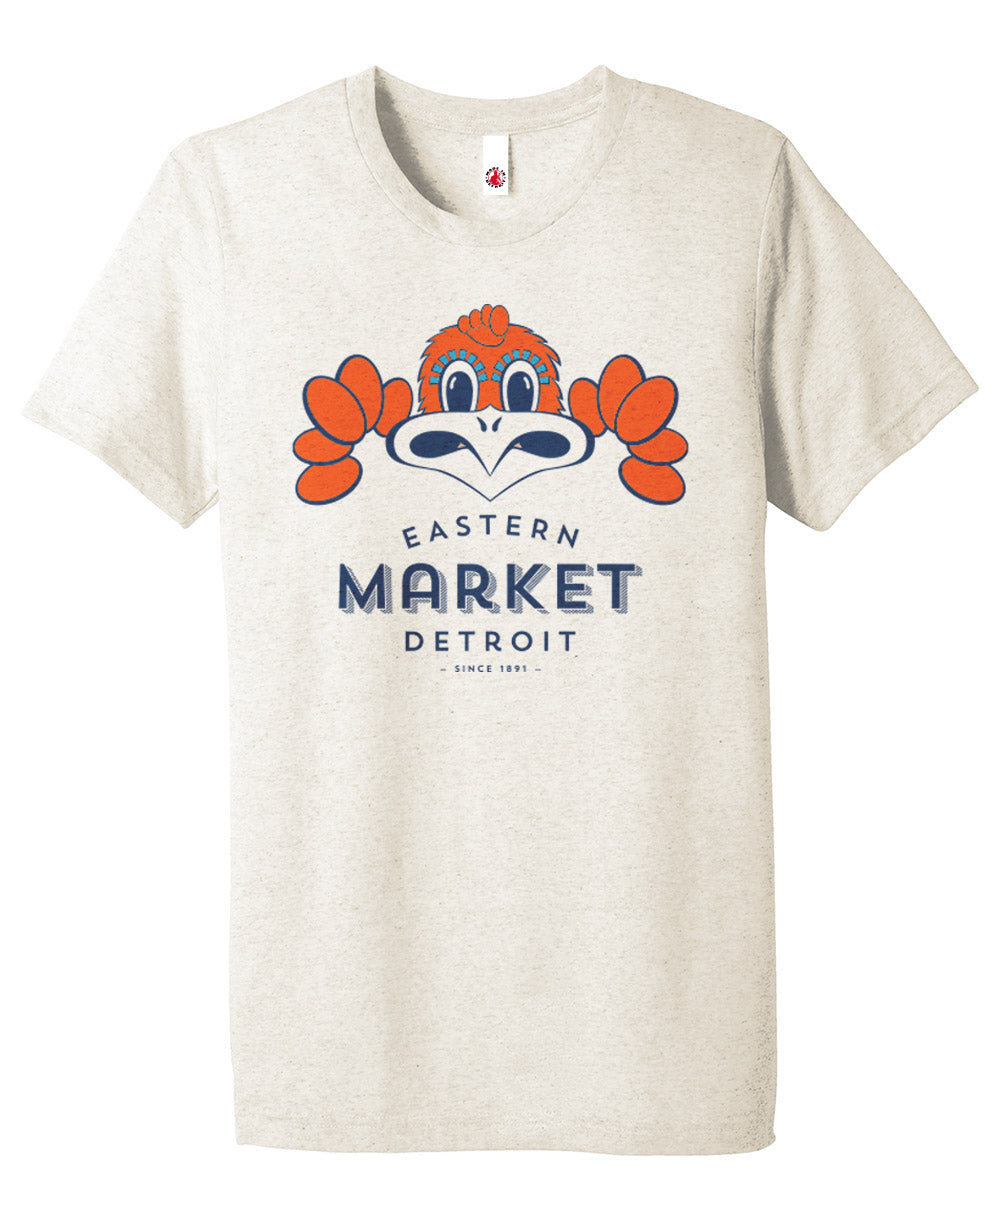 Eastern Market multi colored print on Oatmeal color tri-blend T-shirt